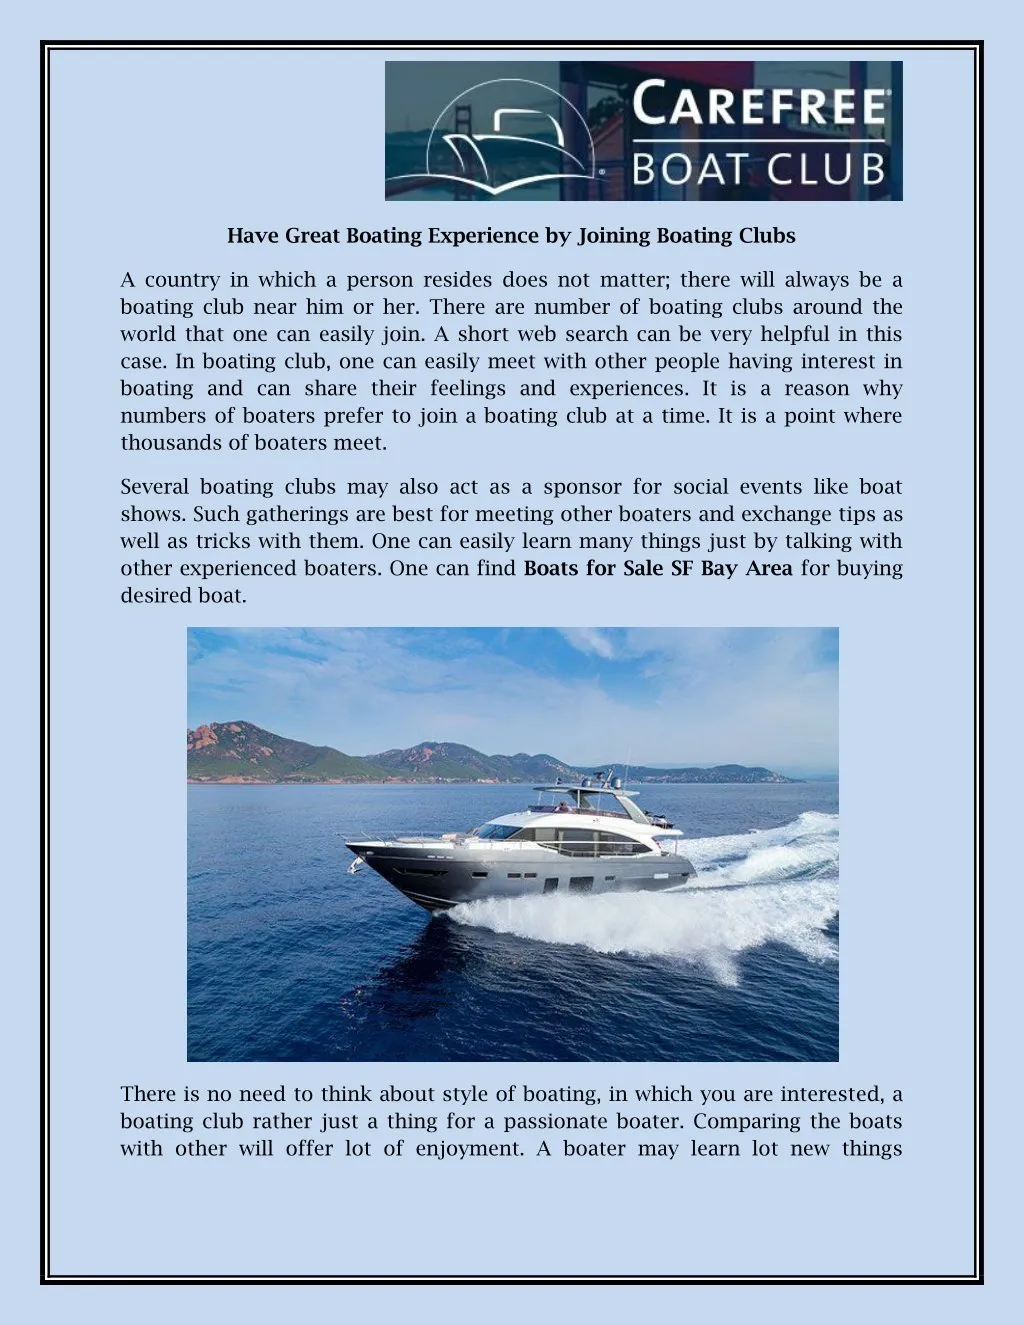 have great boating experience by joining boating